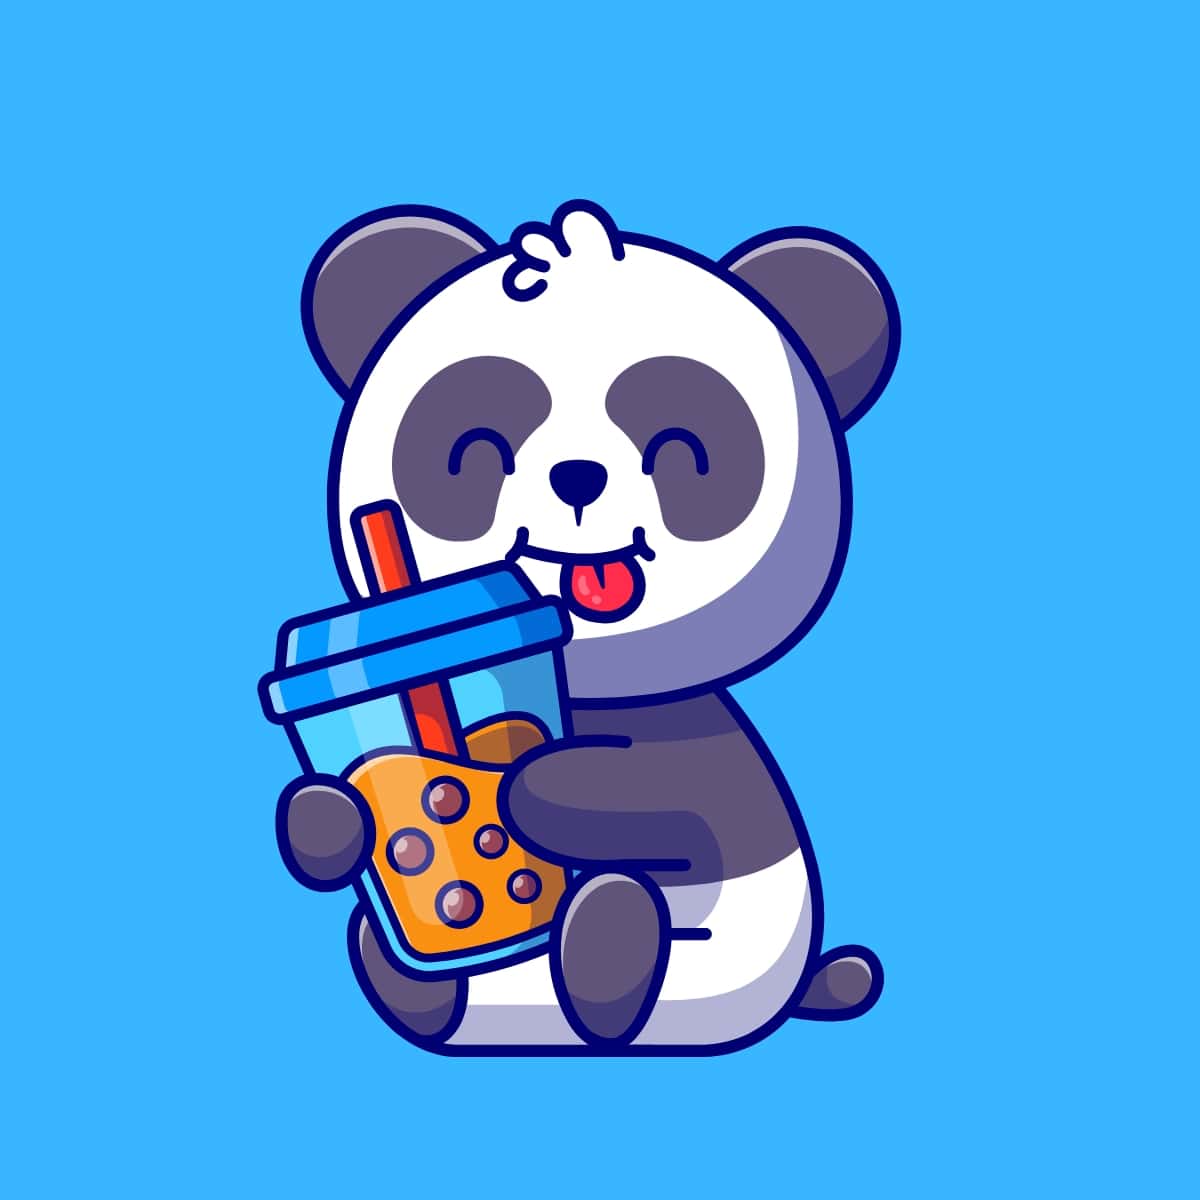 Cartoon graphic of a panda smiling and holding a boba tea on a blue background.